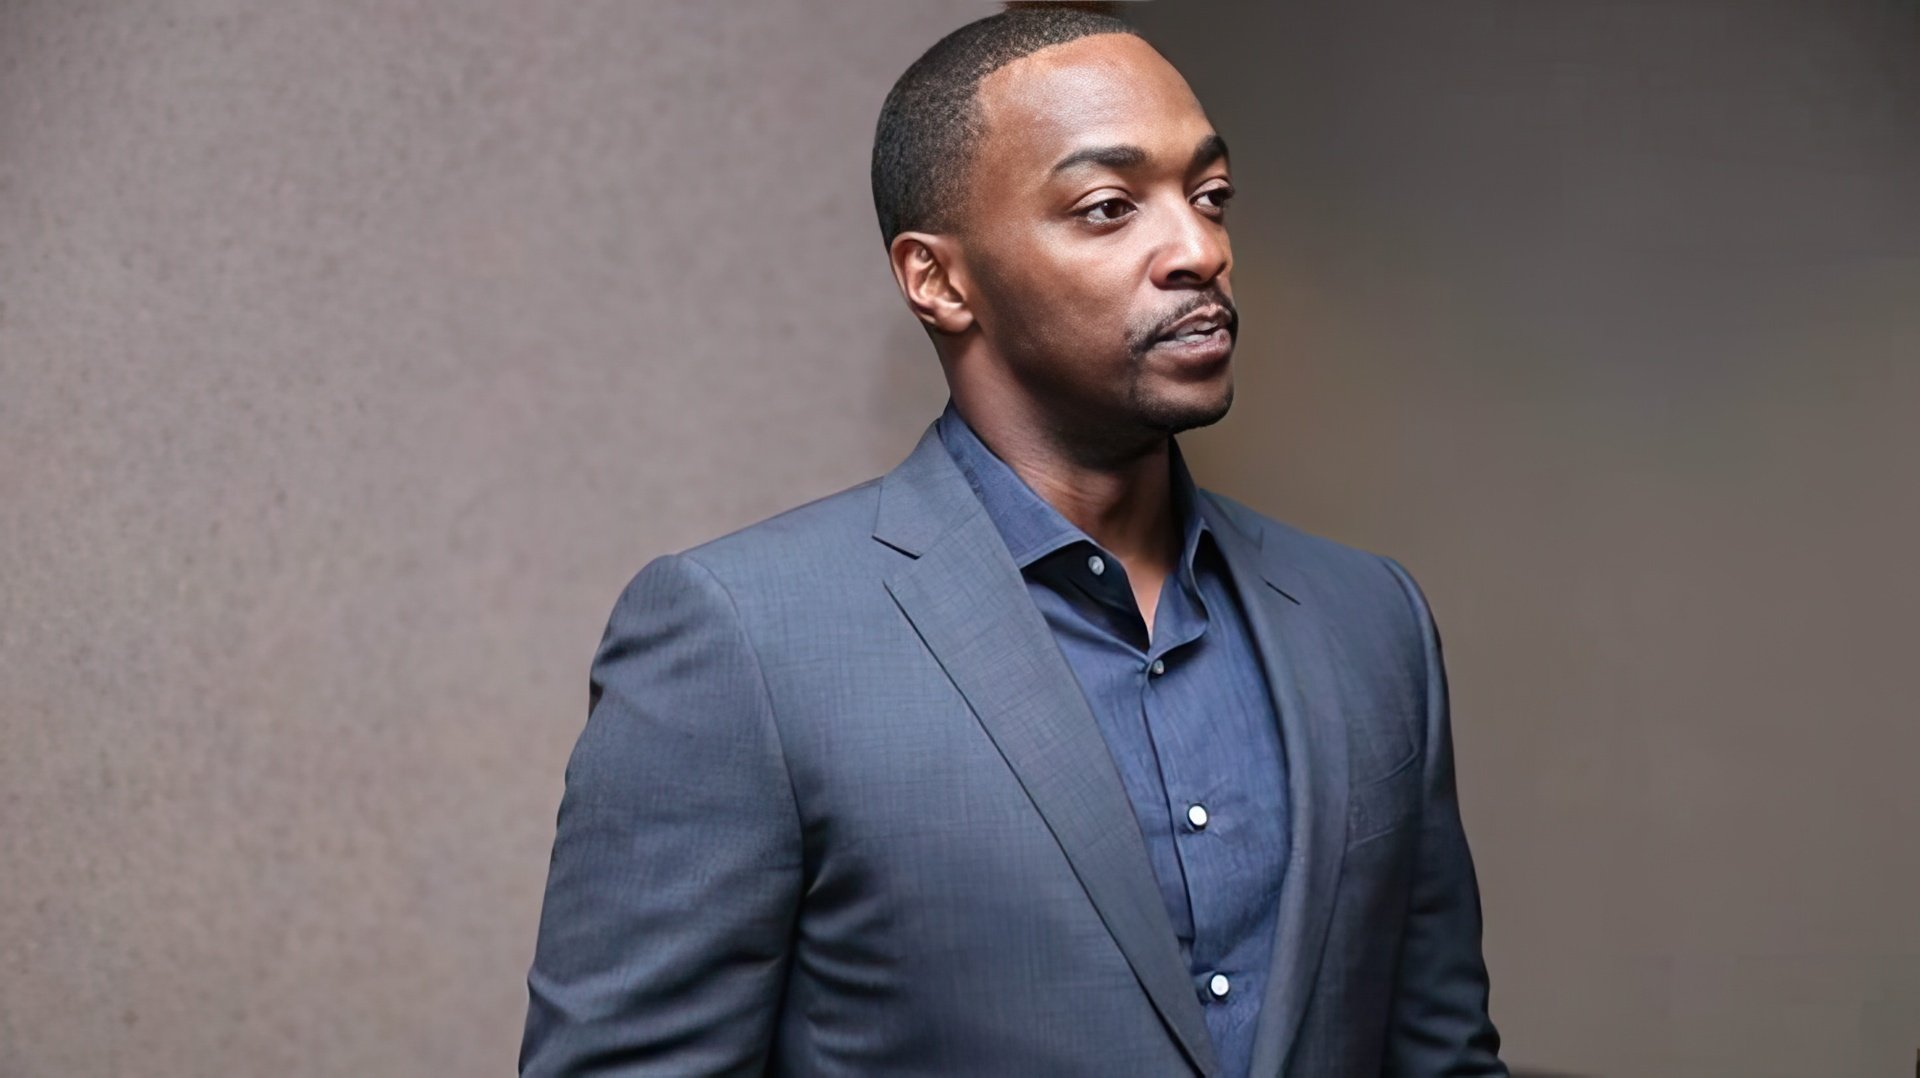 Anthony Mackie doesn’t like to advertise his personal life